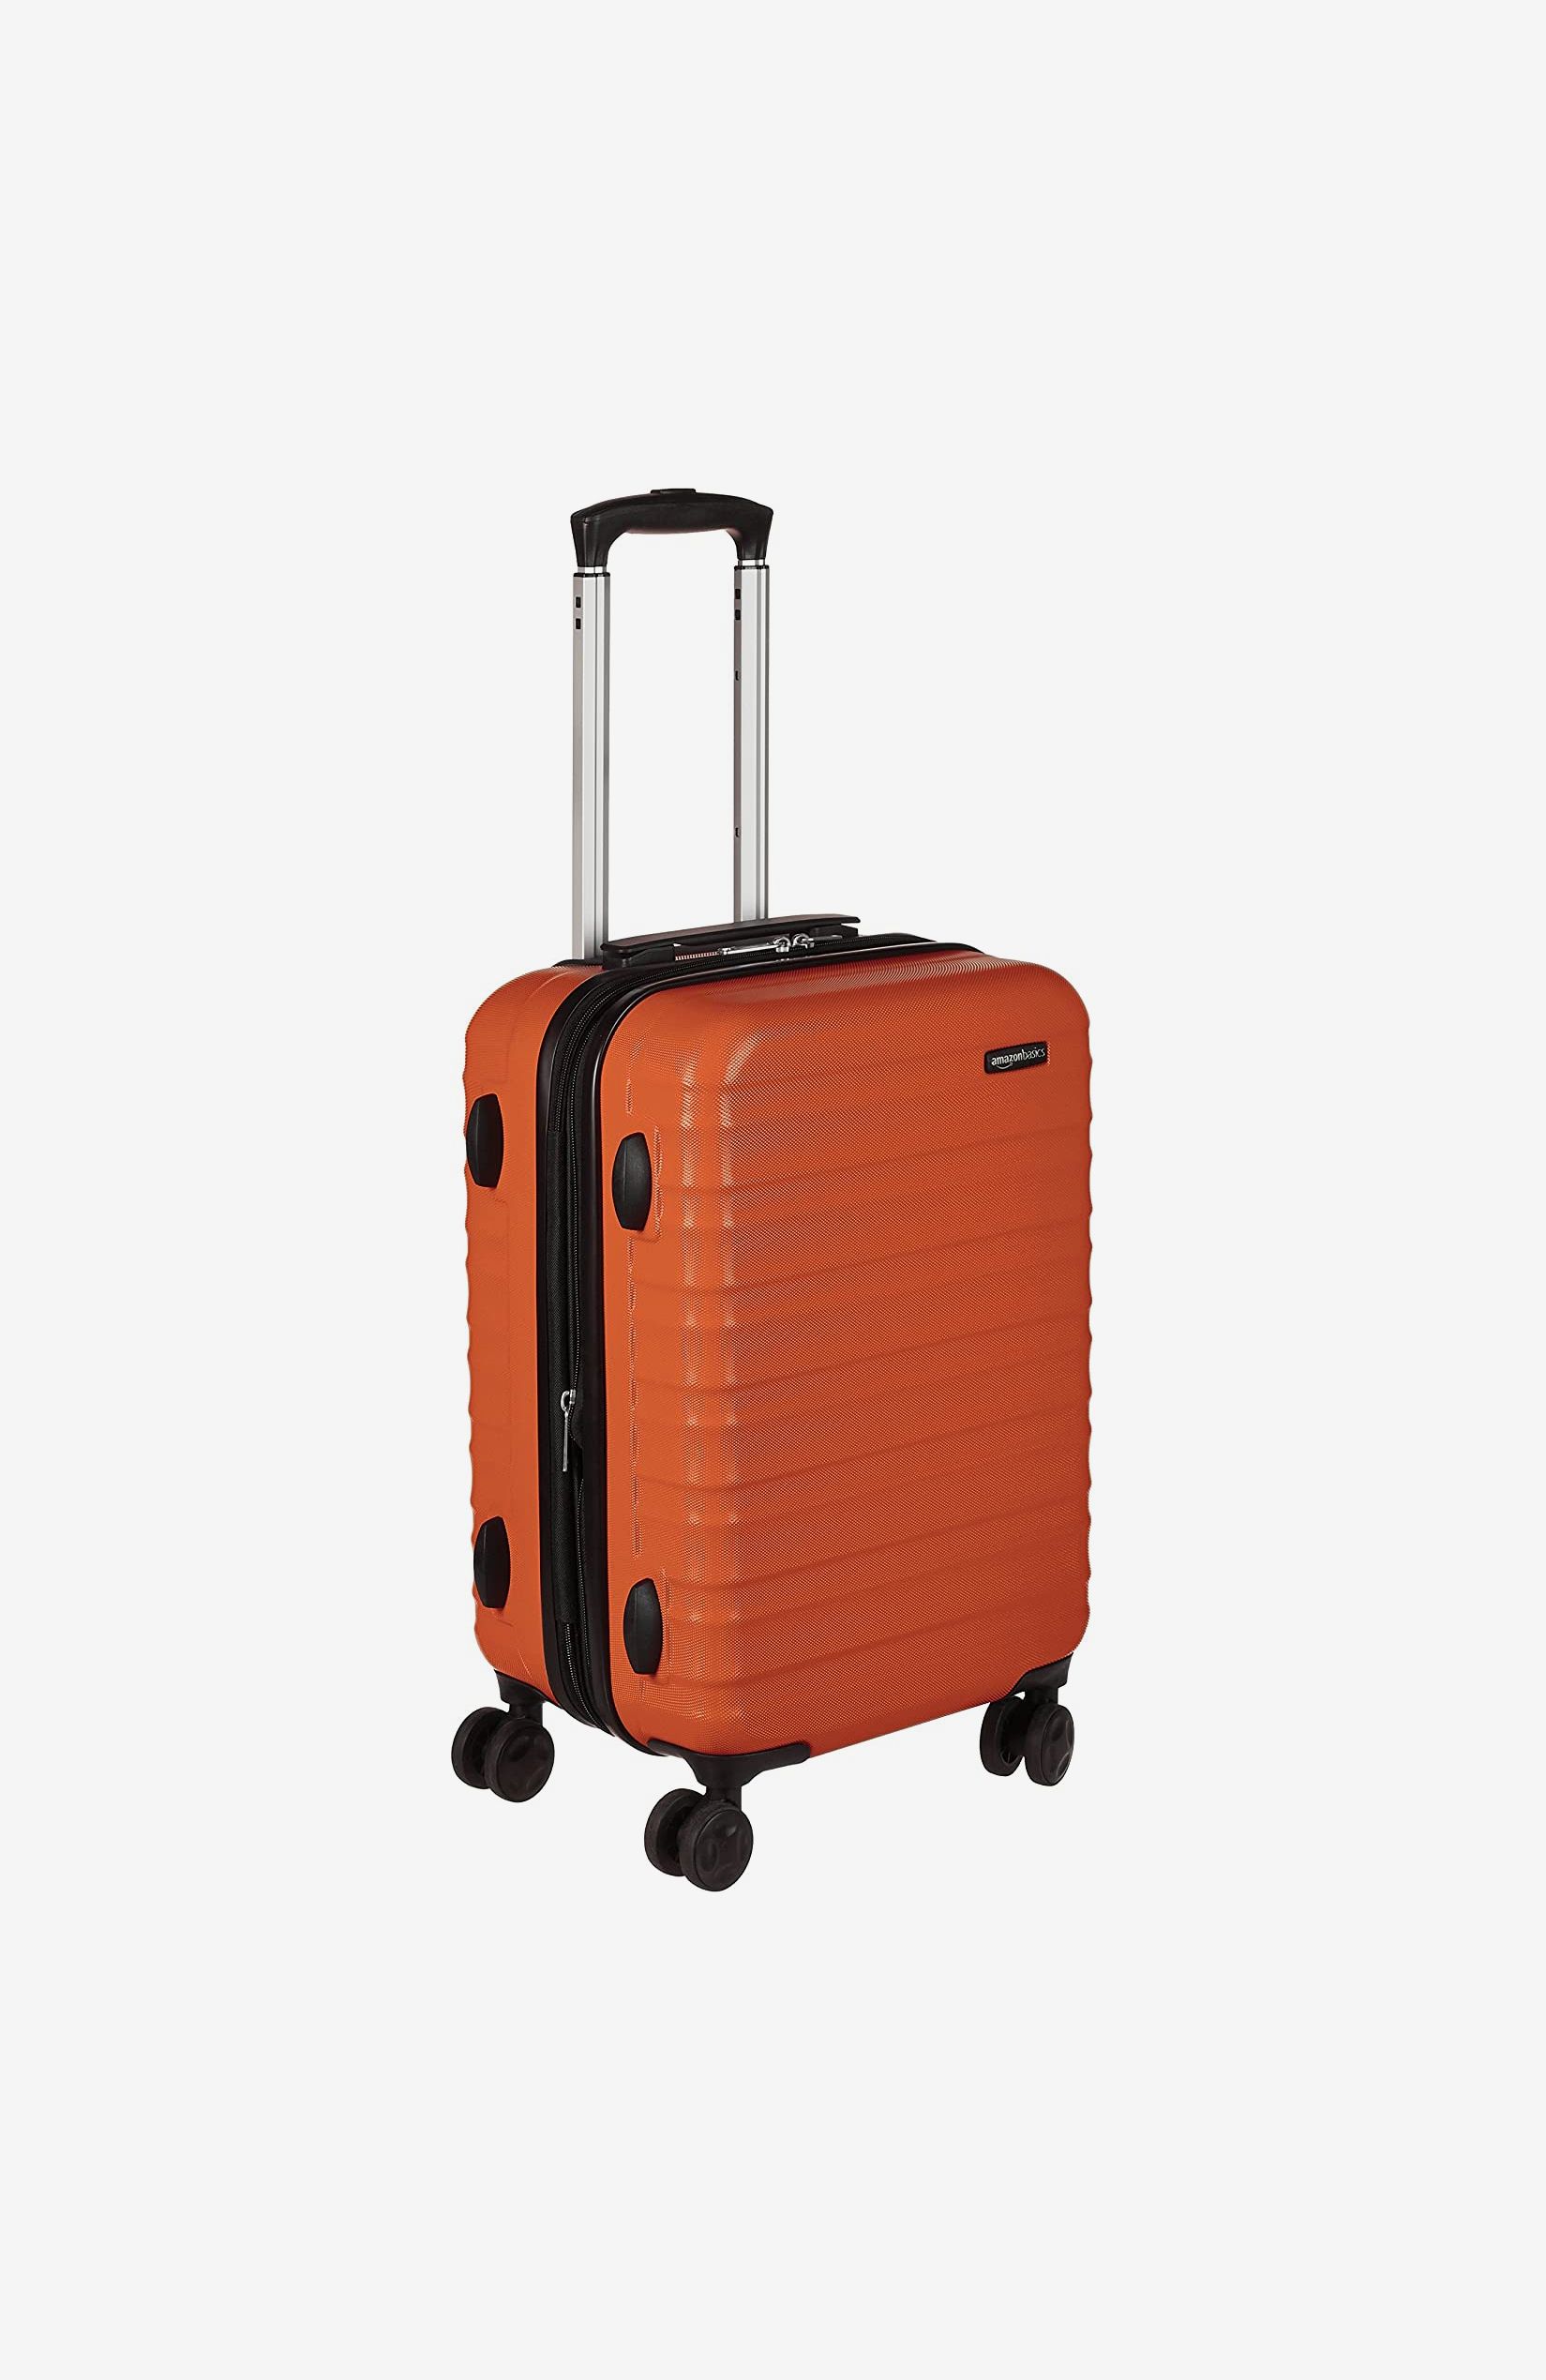 Roses Are Very Bright Traveler Lightweight Rotating Luggage Protector Case Can Carry With You Can Expand Travel Bag Trolley Rolling Luggage Protector Case 